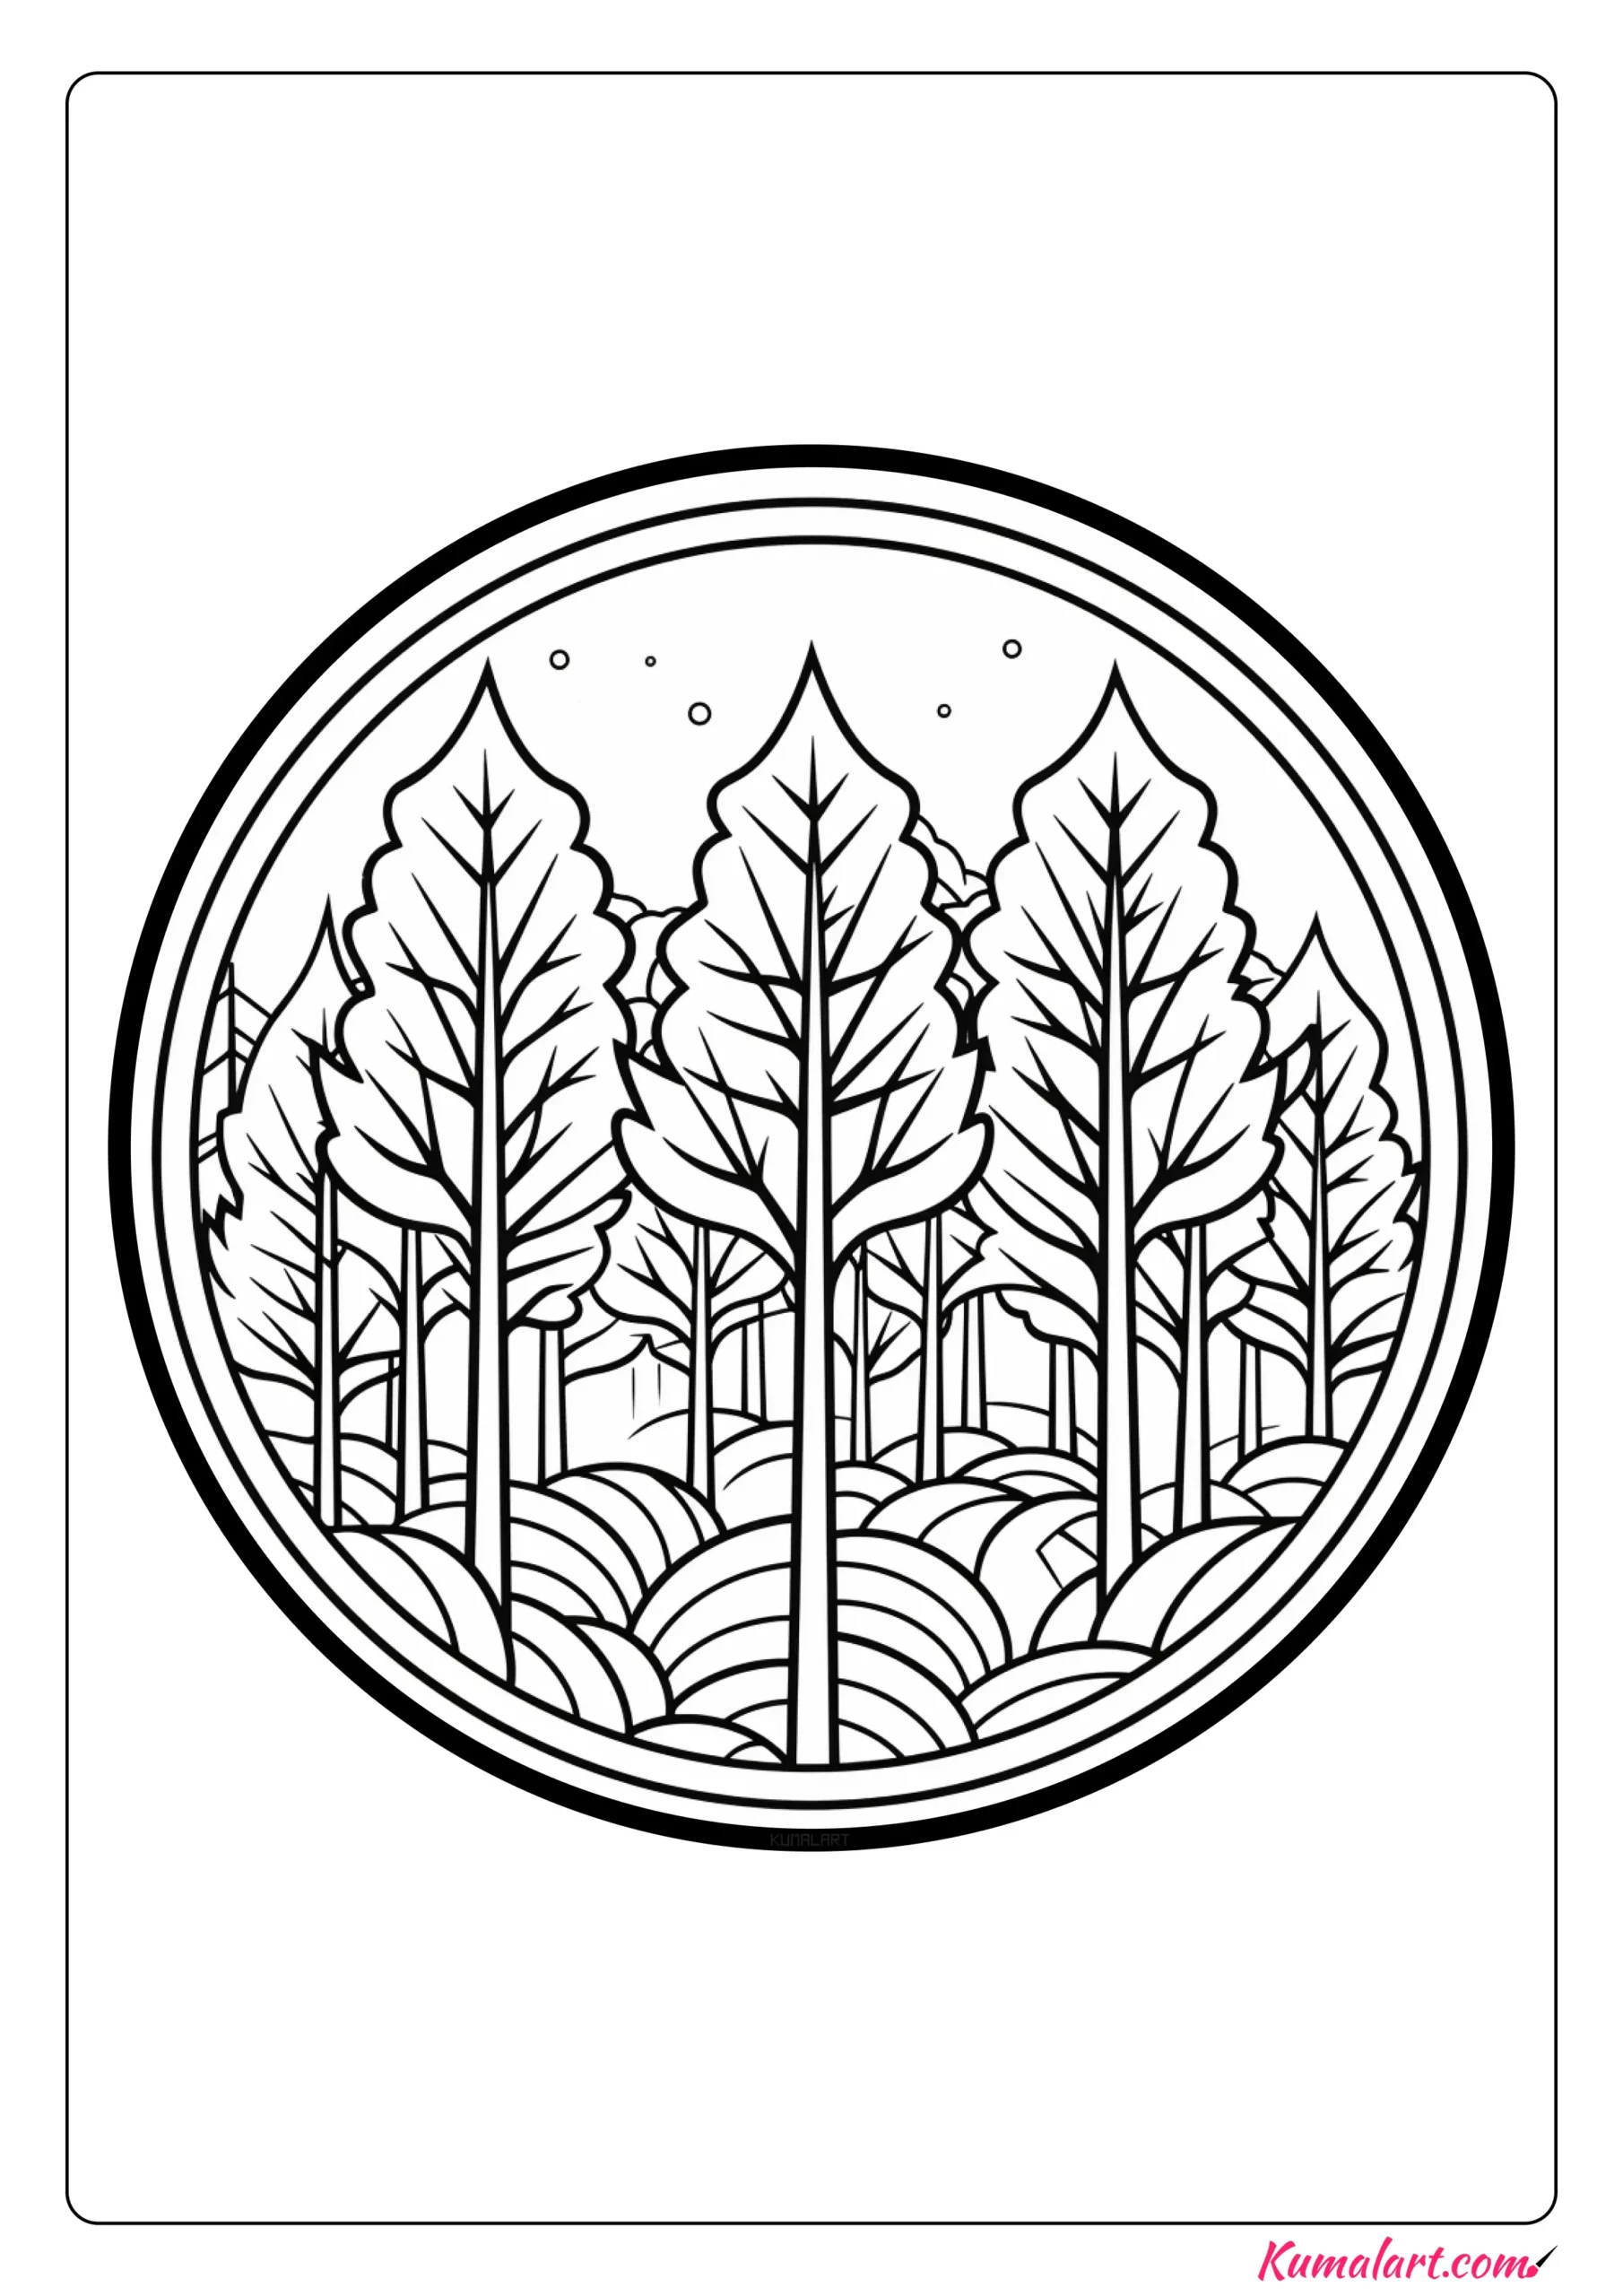 Regal Forest Coloring Page